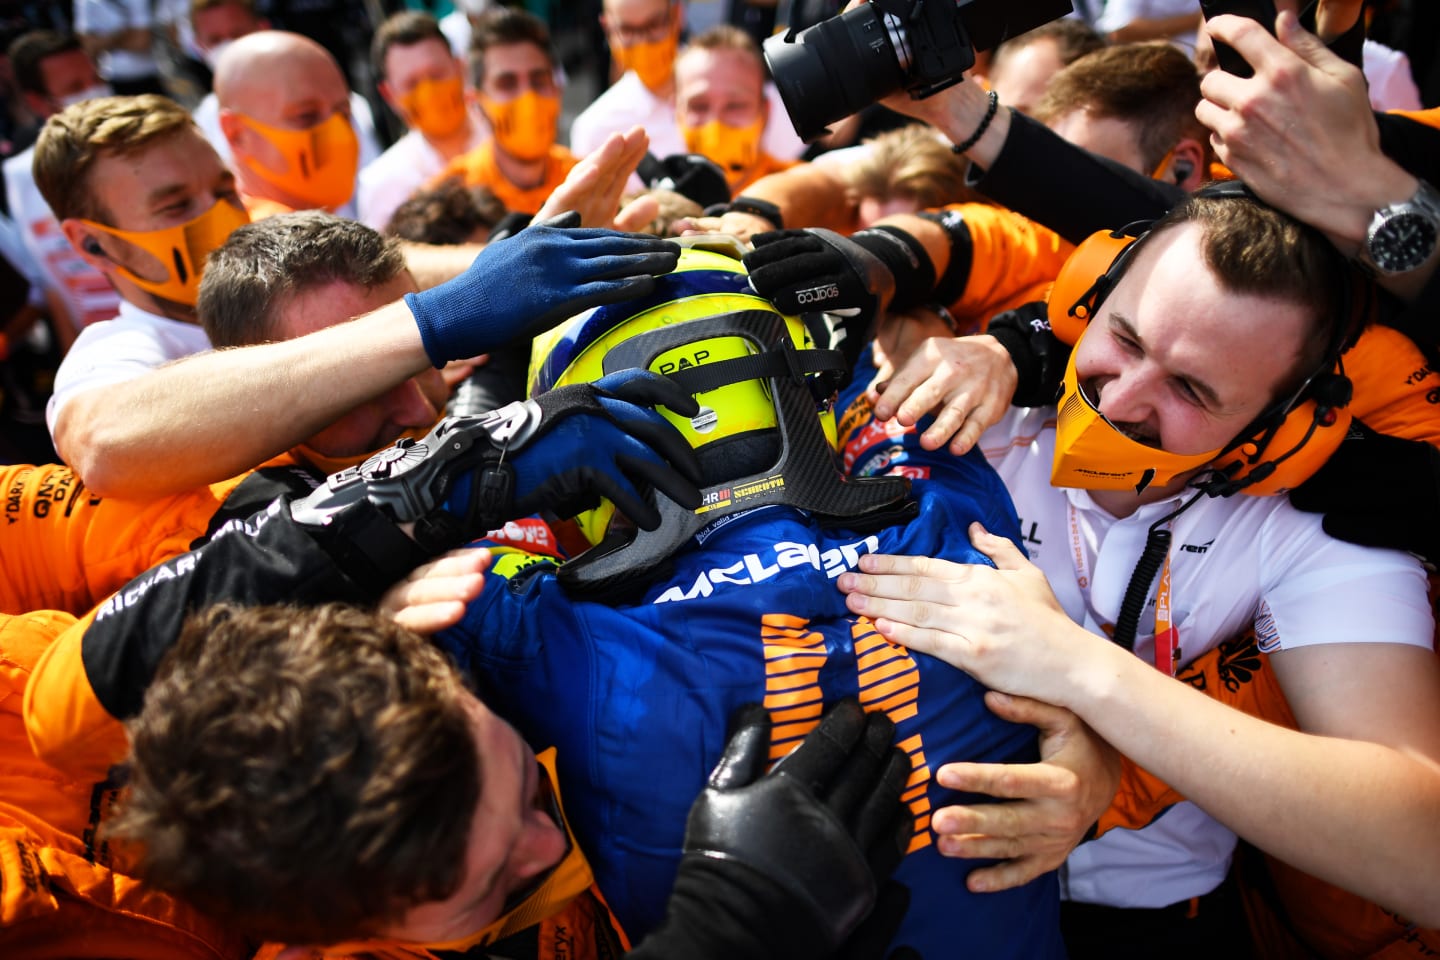 SPIELBERG, AUSTRIA - JULY 04: Third placed Lando Norris of Great Britain and McLaren F1 celebrates in parc ferme during the F1 Grand Prix of Austria at Red Bull Ring on July 04, 2021 in Spielberg, Austria. (Photo by Christian Bruna - Pool/Getty Images)